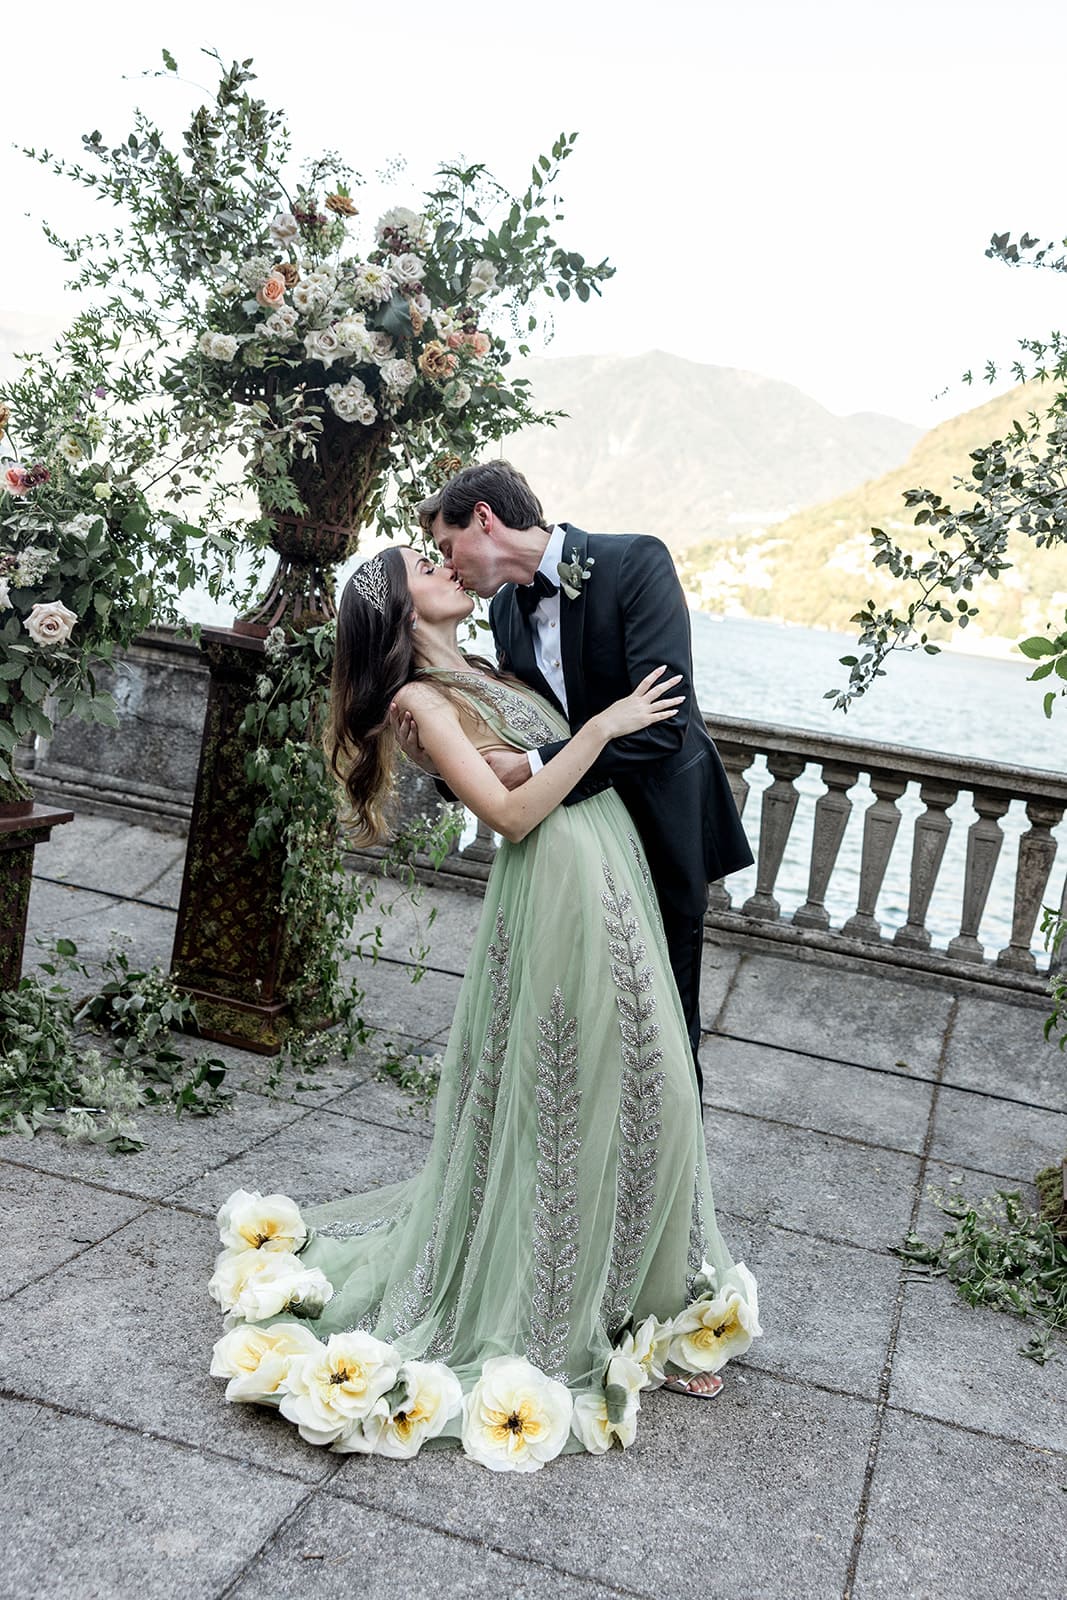 Groom kisses bride with a view of Lake Como in the background